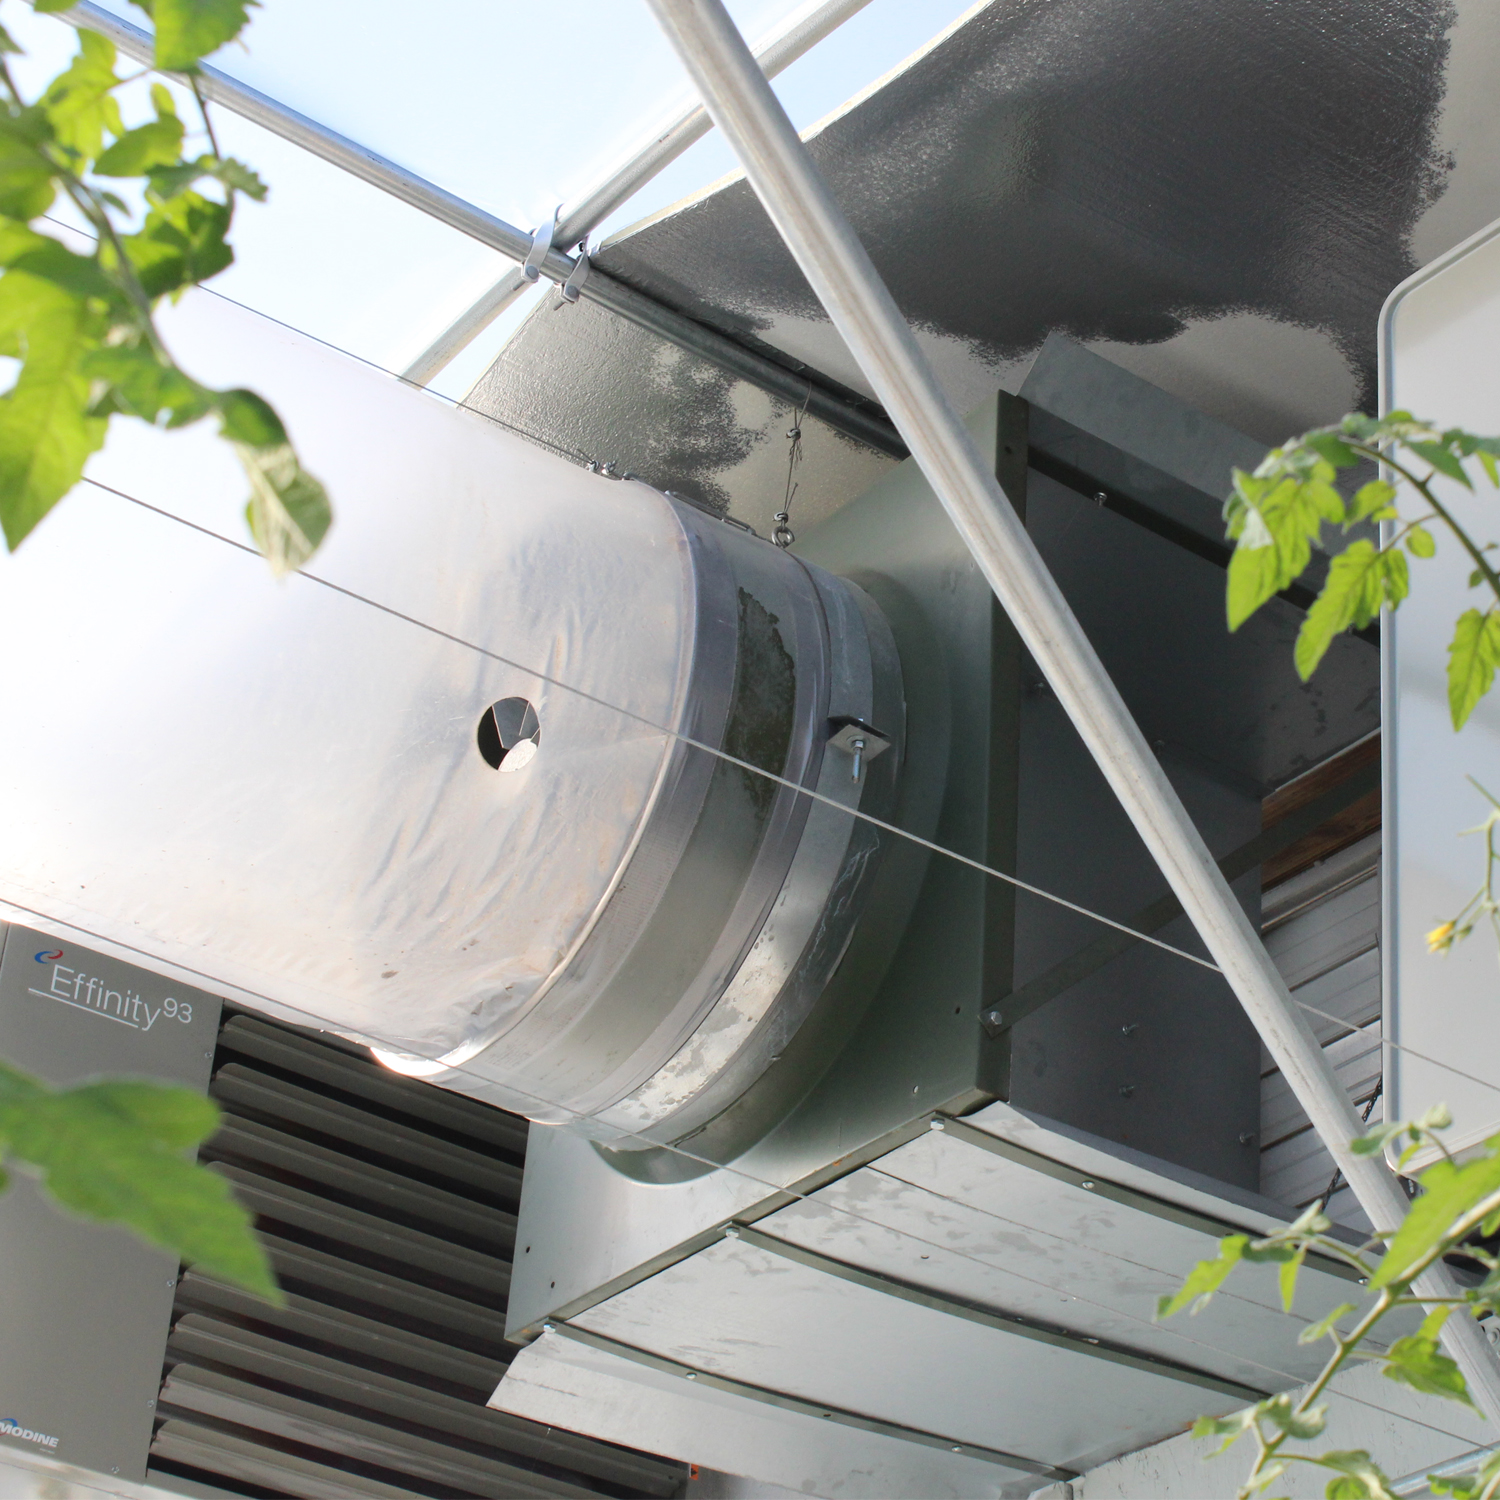 Greenhouse Cooling Systems | Fan Jet System | Greenhouse Ventilation